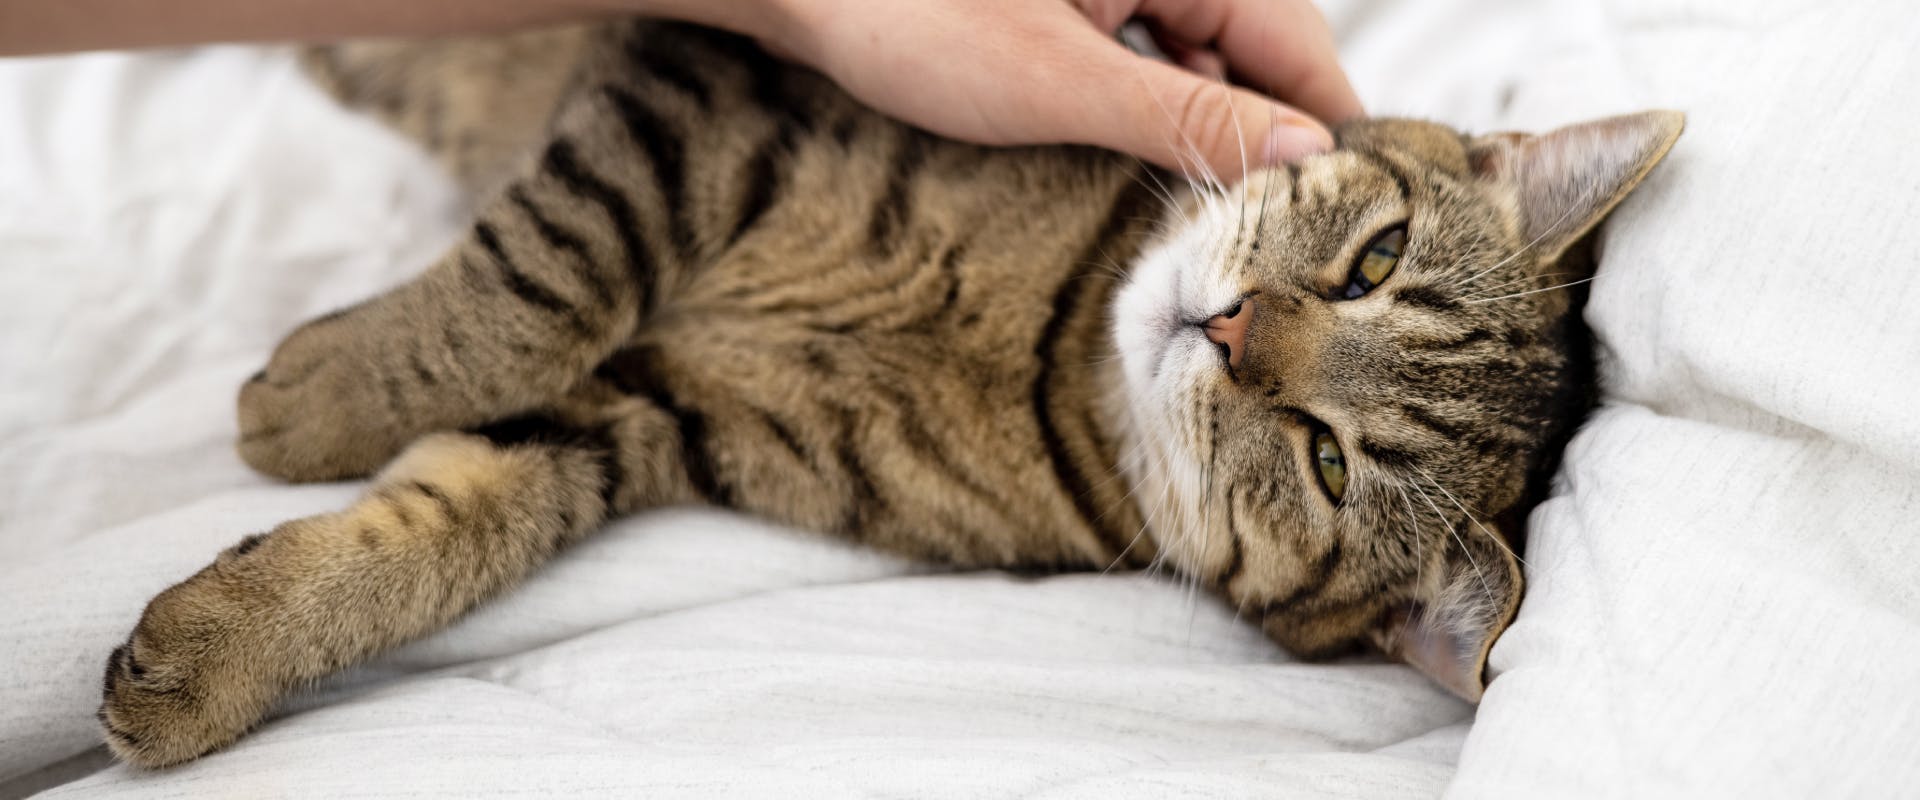 a sleepy brown tabby cat lying on white sheets while being stroked by a human hand